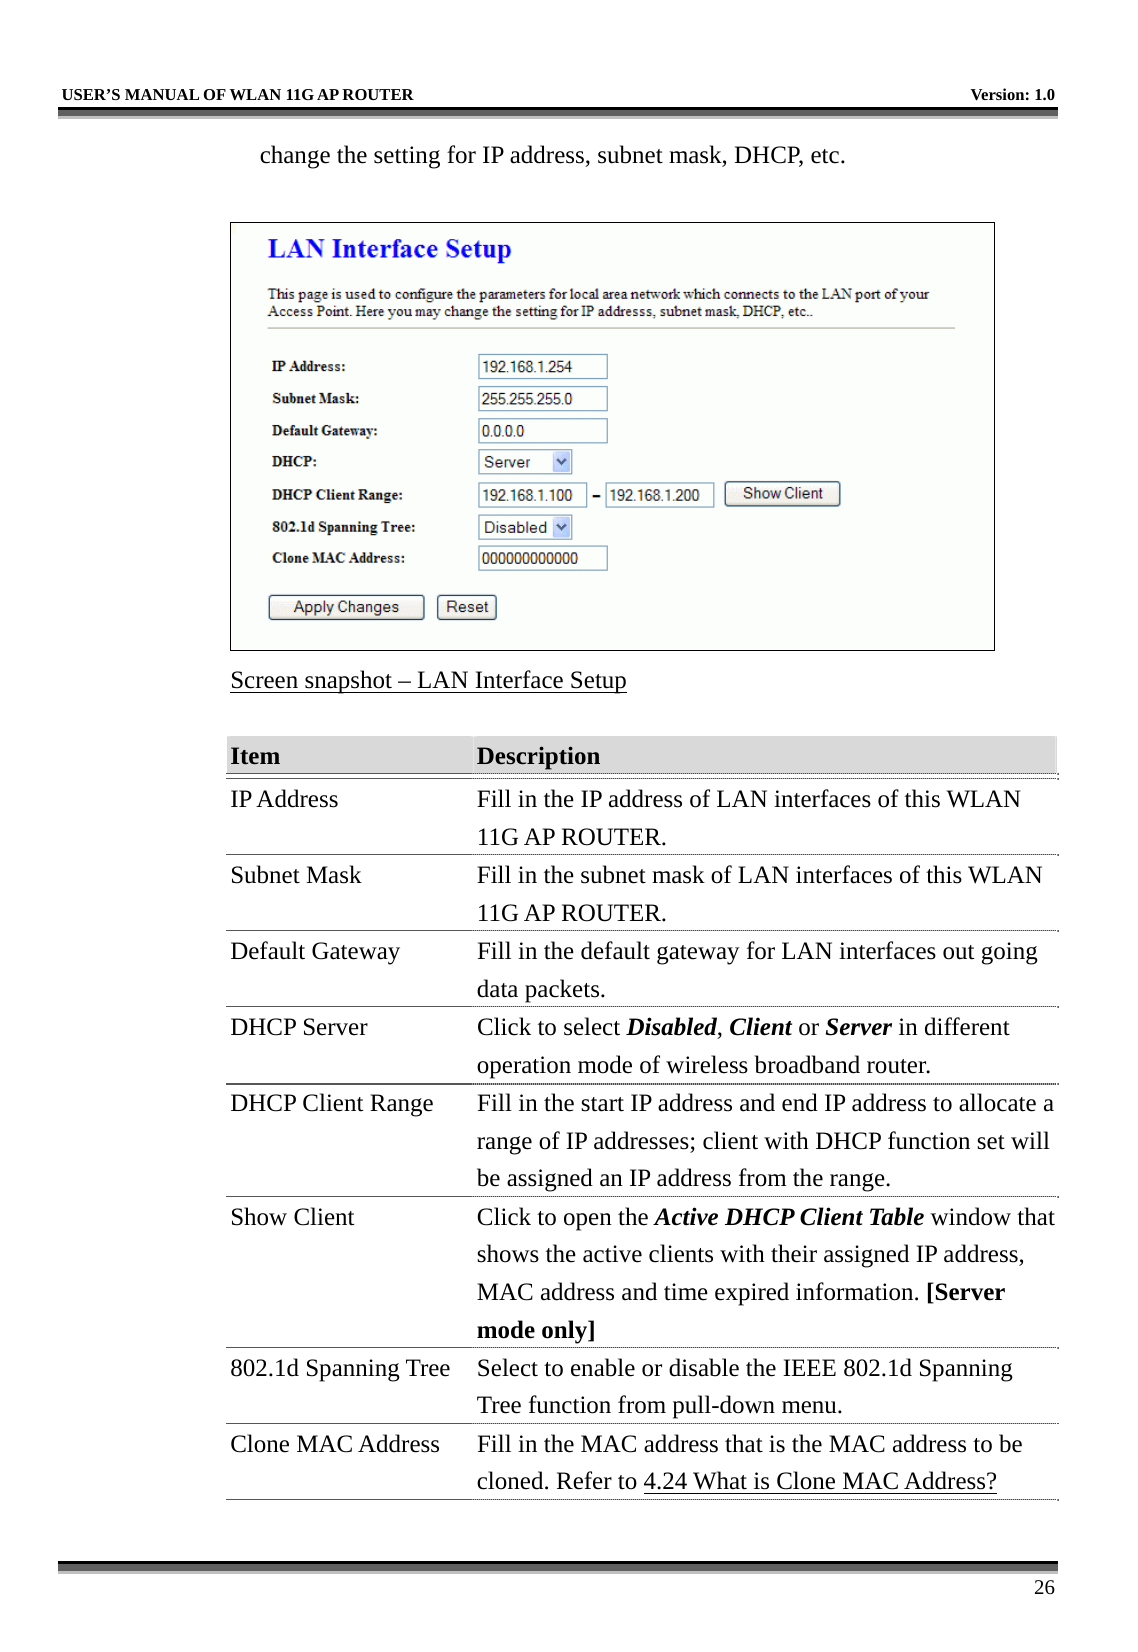   USER’S MANUAL OF WLAN 11G AP ROUTER    Version: 1.0     26 change the setting for IP address, subnet mask, DHCP, etc.   Screen snapshot – LAN Interface Setup  Item  Description   IP Address  Fill in the IP address of LAN interfaces of this WLAN 11G AP ROUTER. Subnet Mask  Fill in the subnet mask of LAN interfaces of this WLAN 11G AP ROUTER. Default Gateway  Fill in the default gateway for LAN interfaces out going data packets. DHCP Server  Click to select Disabled, Client or Server in different operation mode of wireless broadband router. DHCP Client Range  Fill in the start IP address and end IP address to allocate a range of IP addresses; client with DHCP function set will be assigned an IP address from the range. Show Client  Click to open the Active DHCP Client Table window that shows the active clients with their assigned IP address, MAC address and time expired information. [Server mode only] 802.1d Spanning Tree  Select to enable or disable the IEEE 802.1d Spanning Tree function from pull-down menu. Clone MAC Address  Fill in the MAC address that is the MAC address to be cloned. Refer to 4.24 What is Clone MAC Address? 